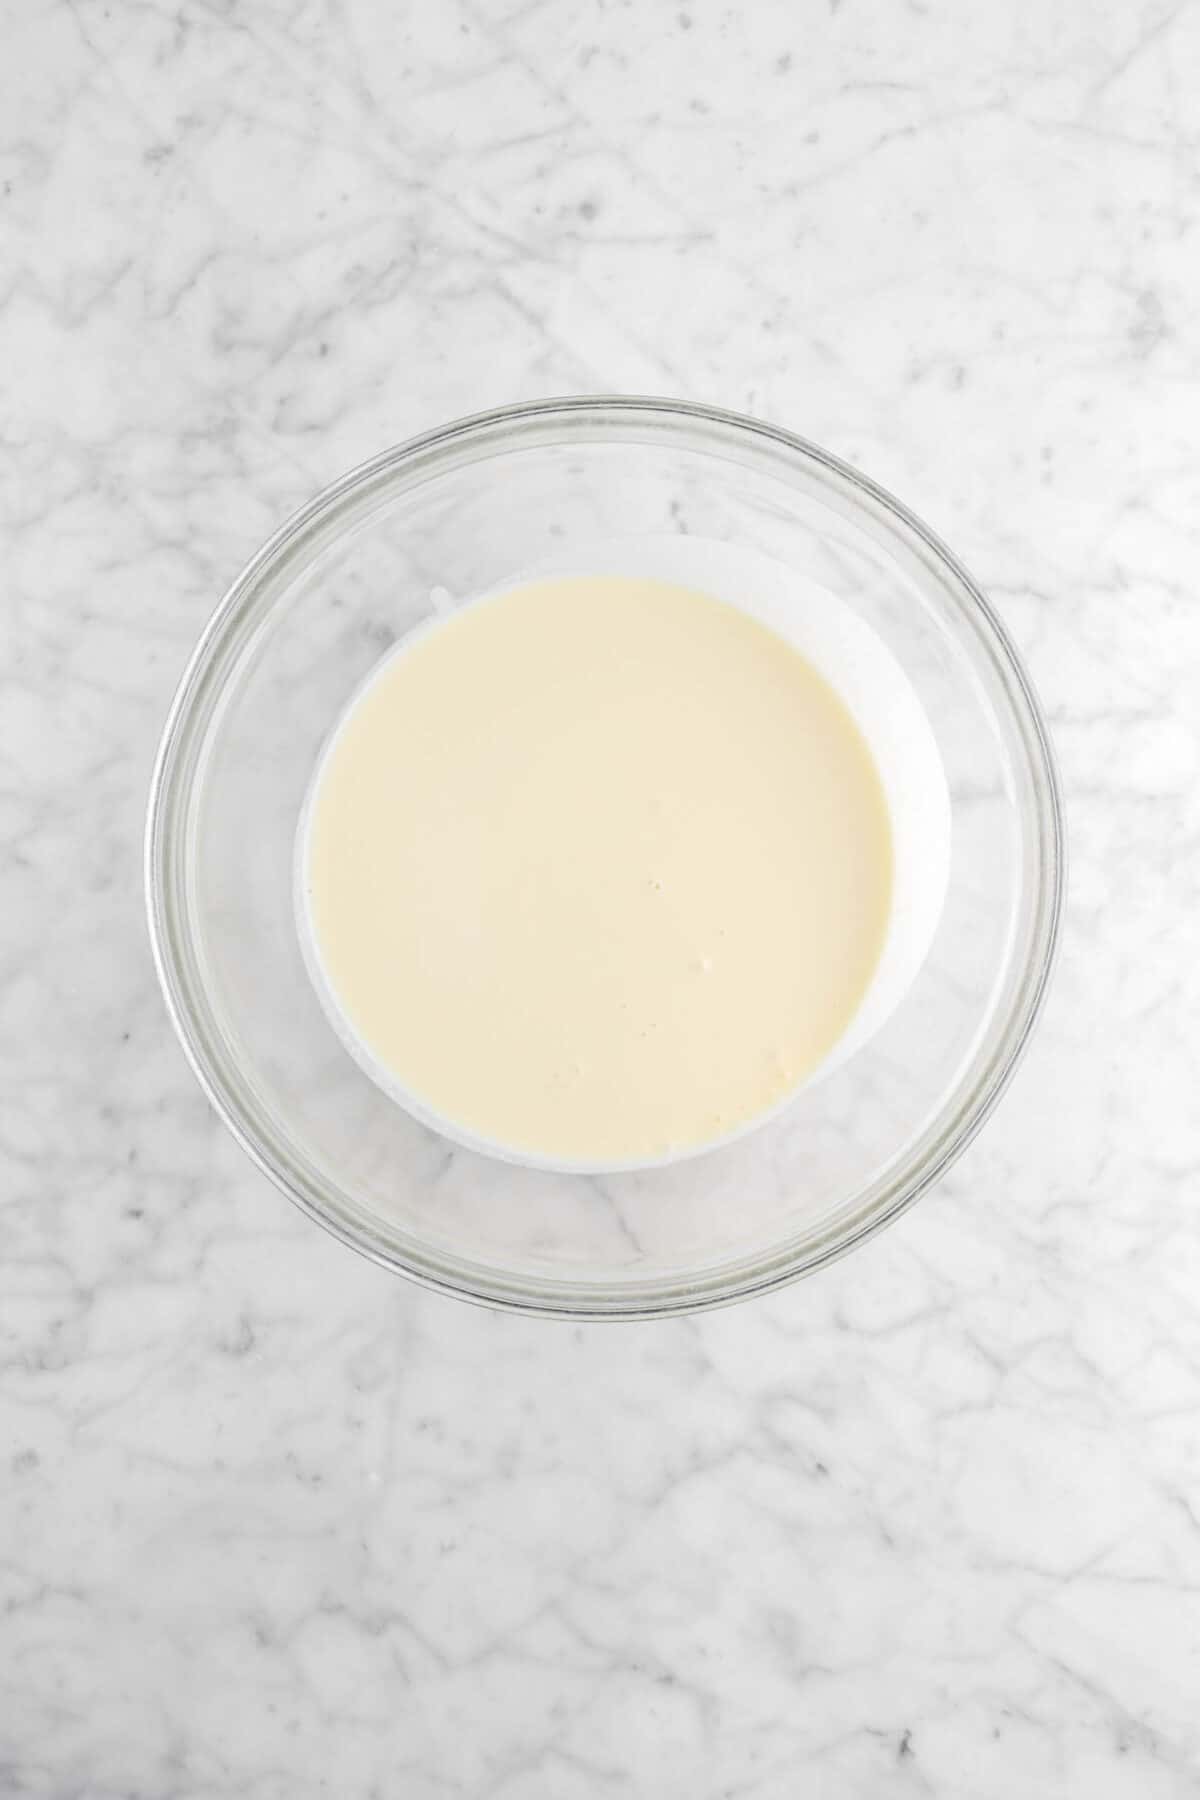 chilled white chocolate mixture in large glass bowl